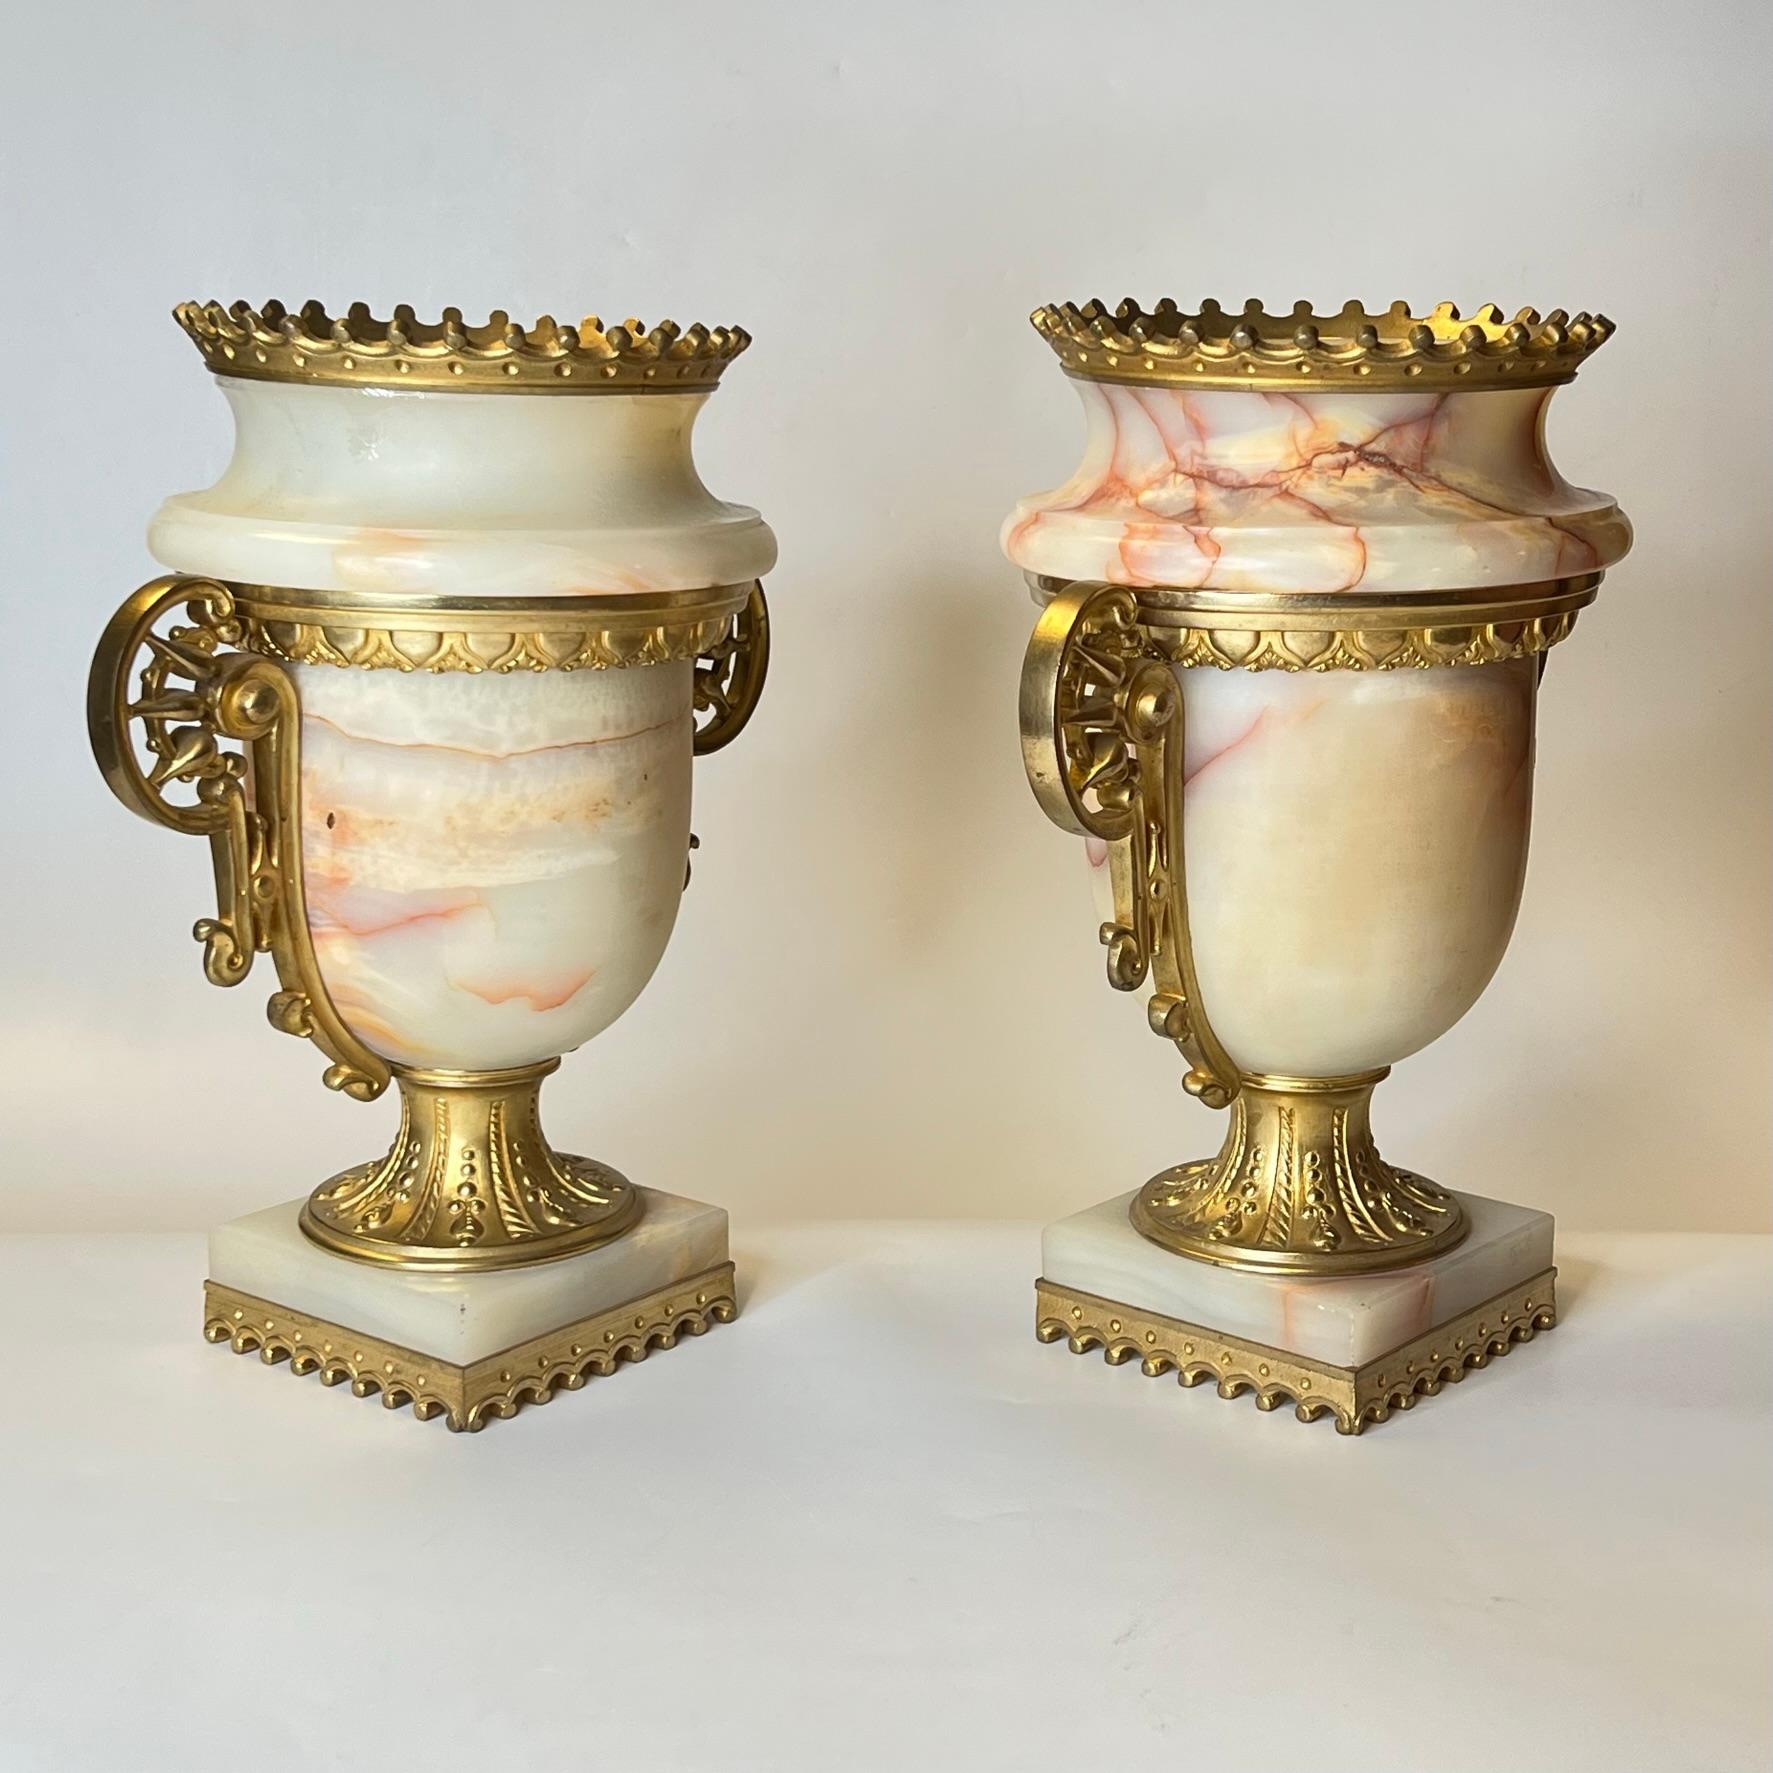 Pair Antique Gilt Bronze Mounted Onyx Urns in Neoclassical Style For Sale 1